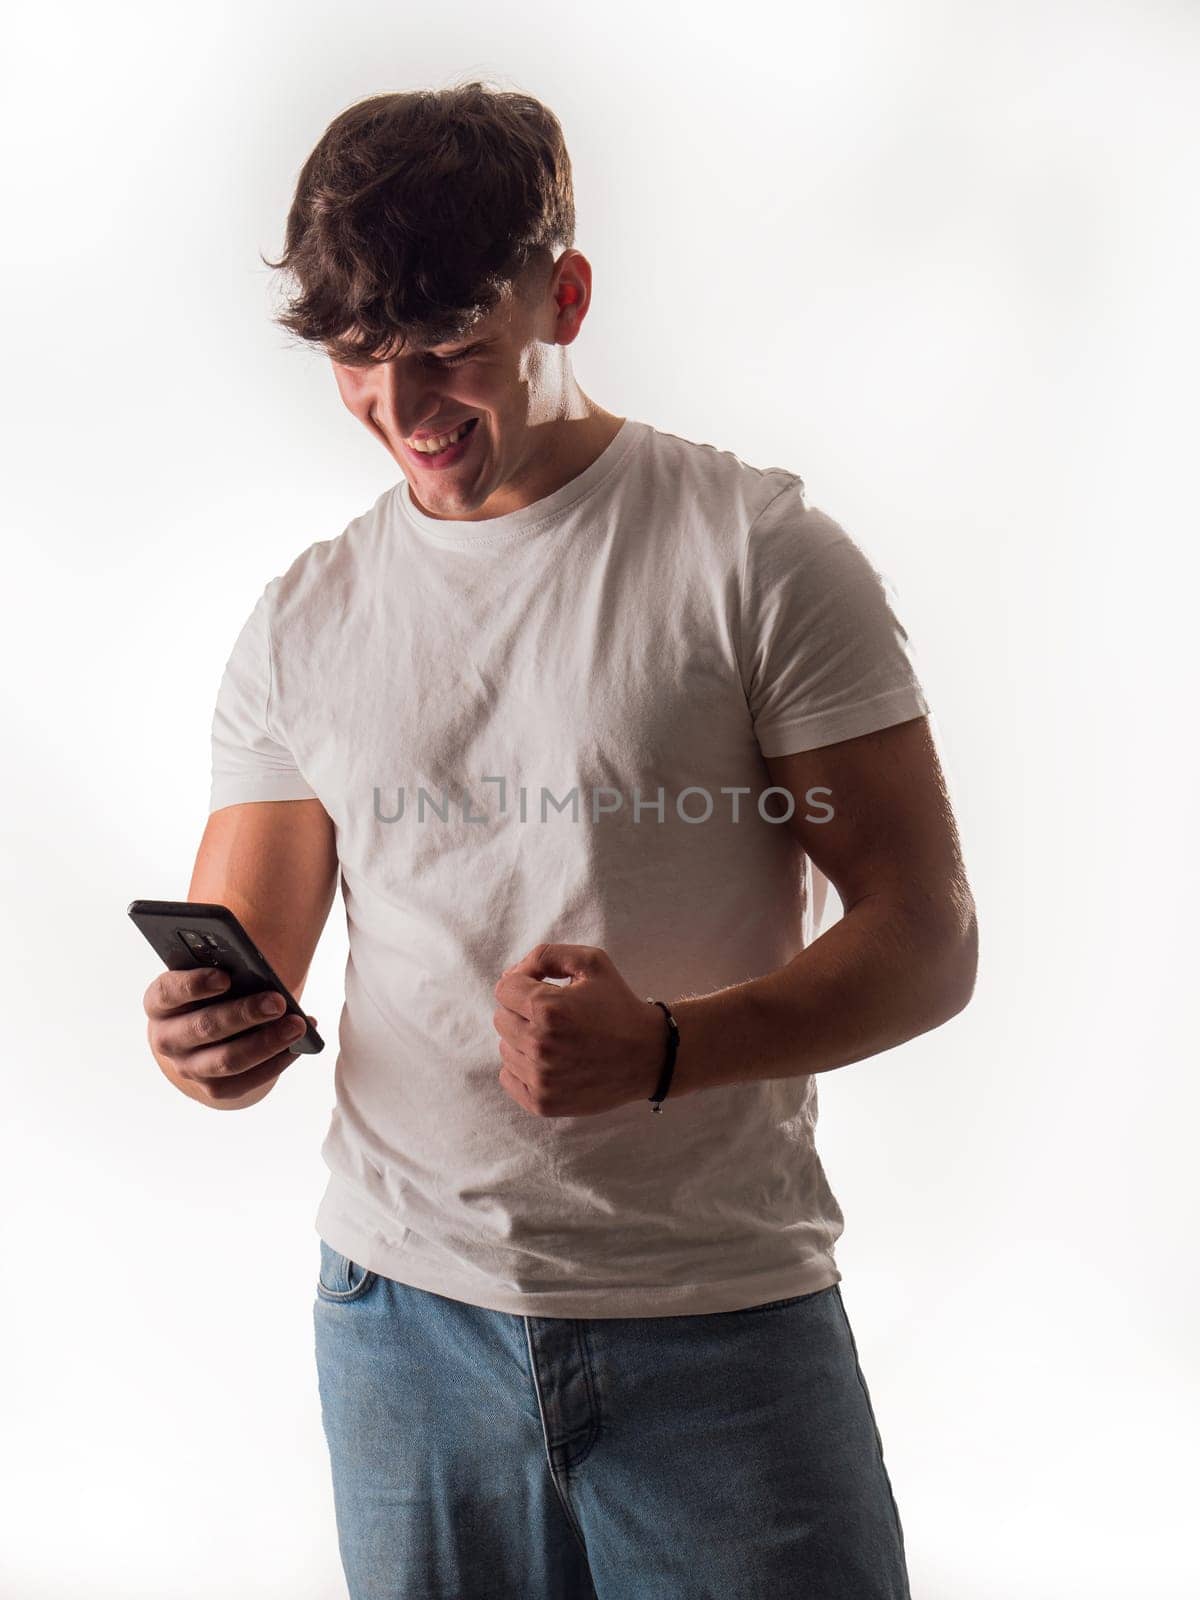 A Joyful Moment Captured: A Handsome Man Laughing With a Cell Phone in a Studio Setting by artofphoto